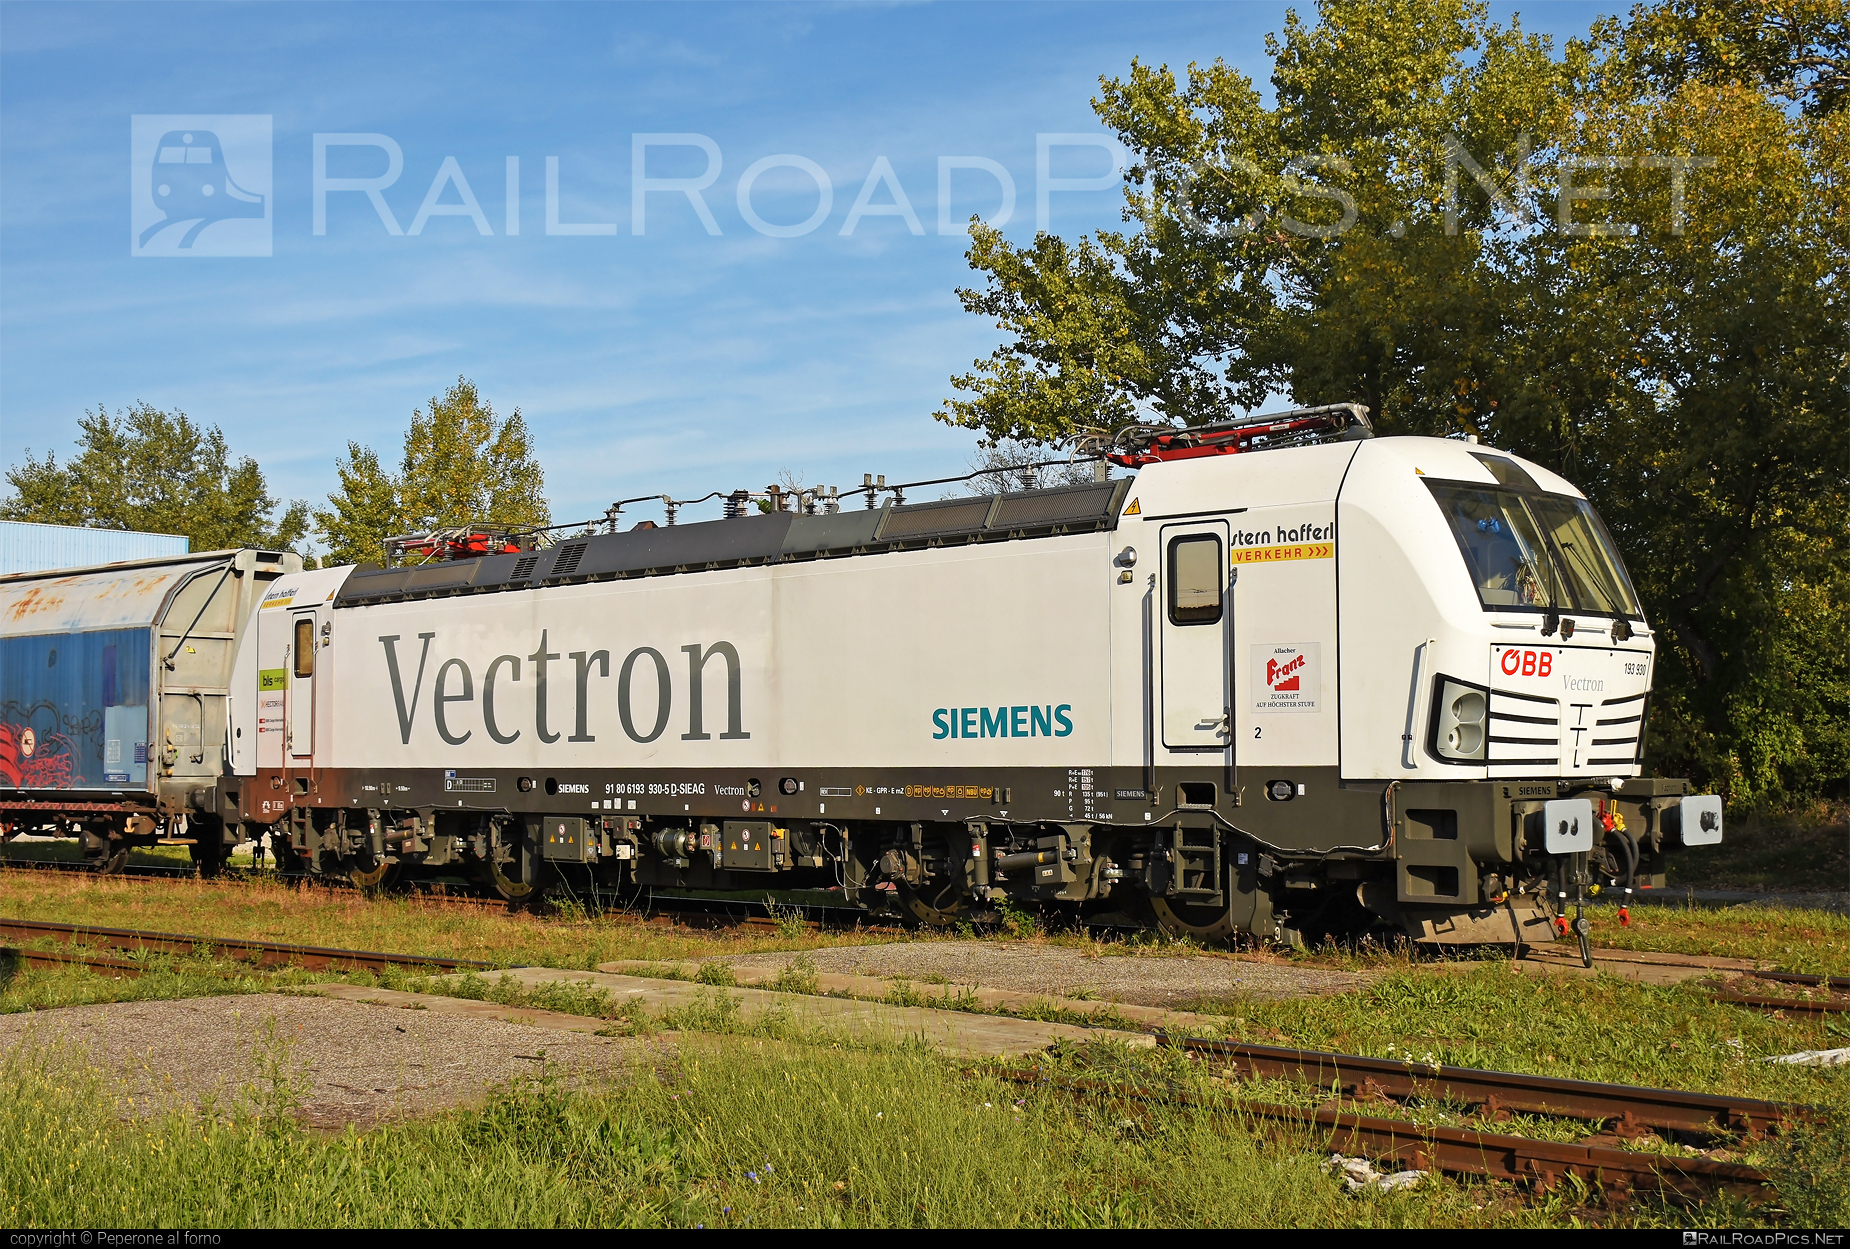 Siemens Vectron AC DPM - 193 930 operated by Siemens Mobility GmbH #SiemensMobility #SiemensMobilityGmbH #bls #obb #siemens #siemensVectron #siemensVectronACDPM #vectron #vectronACDPM